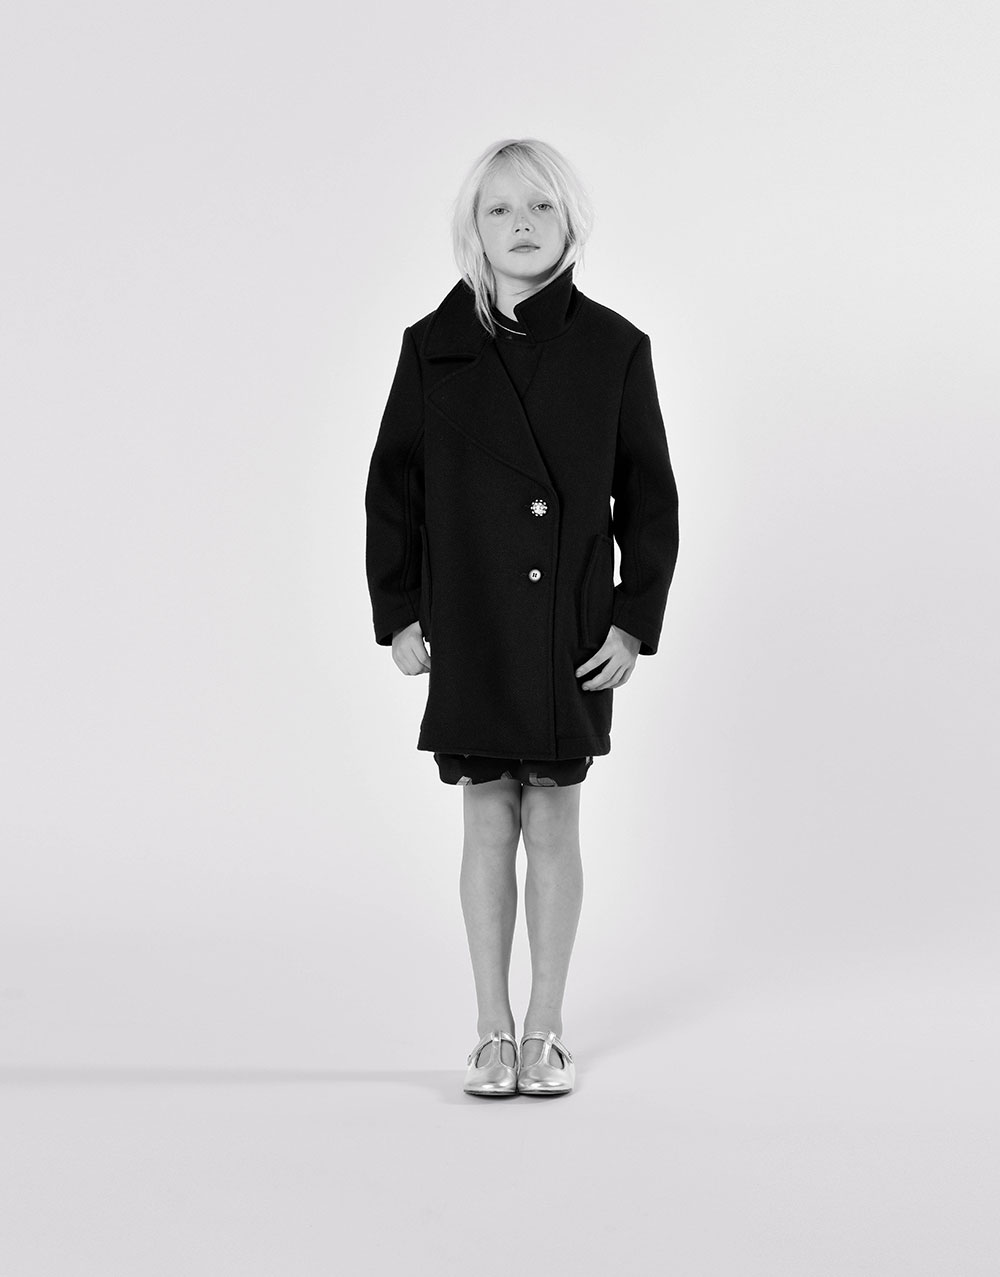 black dress and coat by Lanvin girl collection Fall Winter 